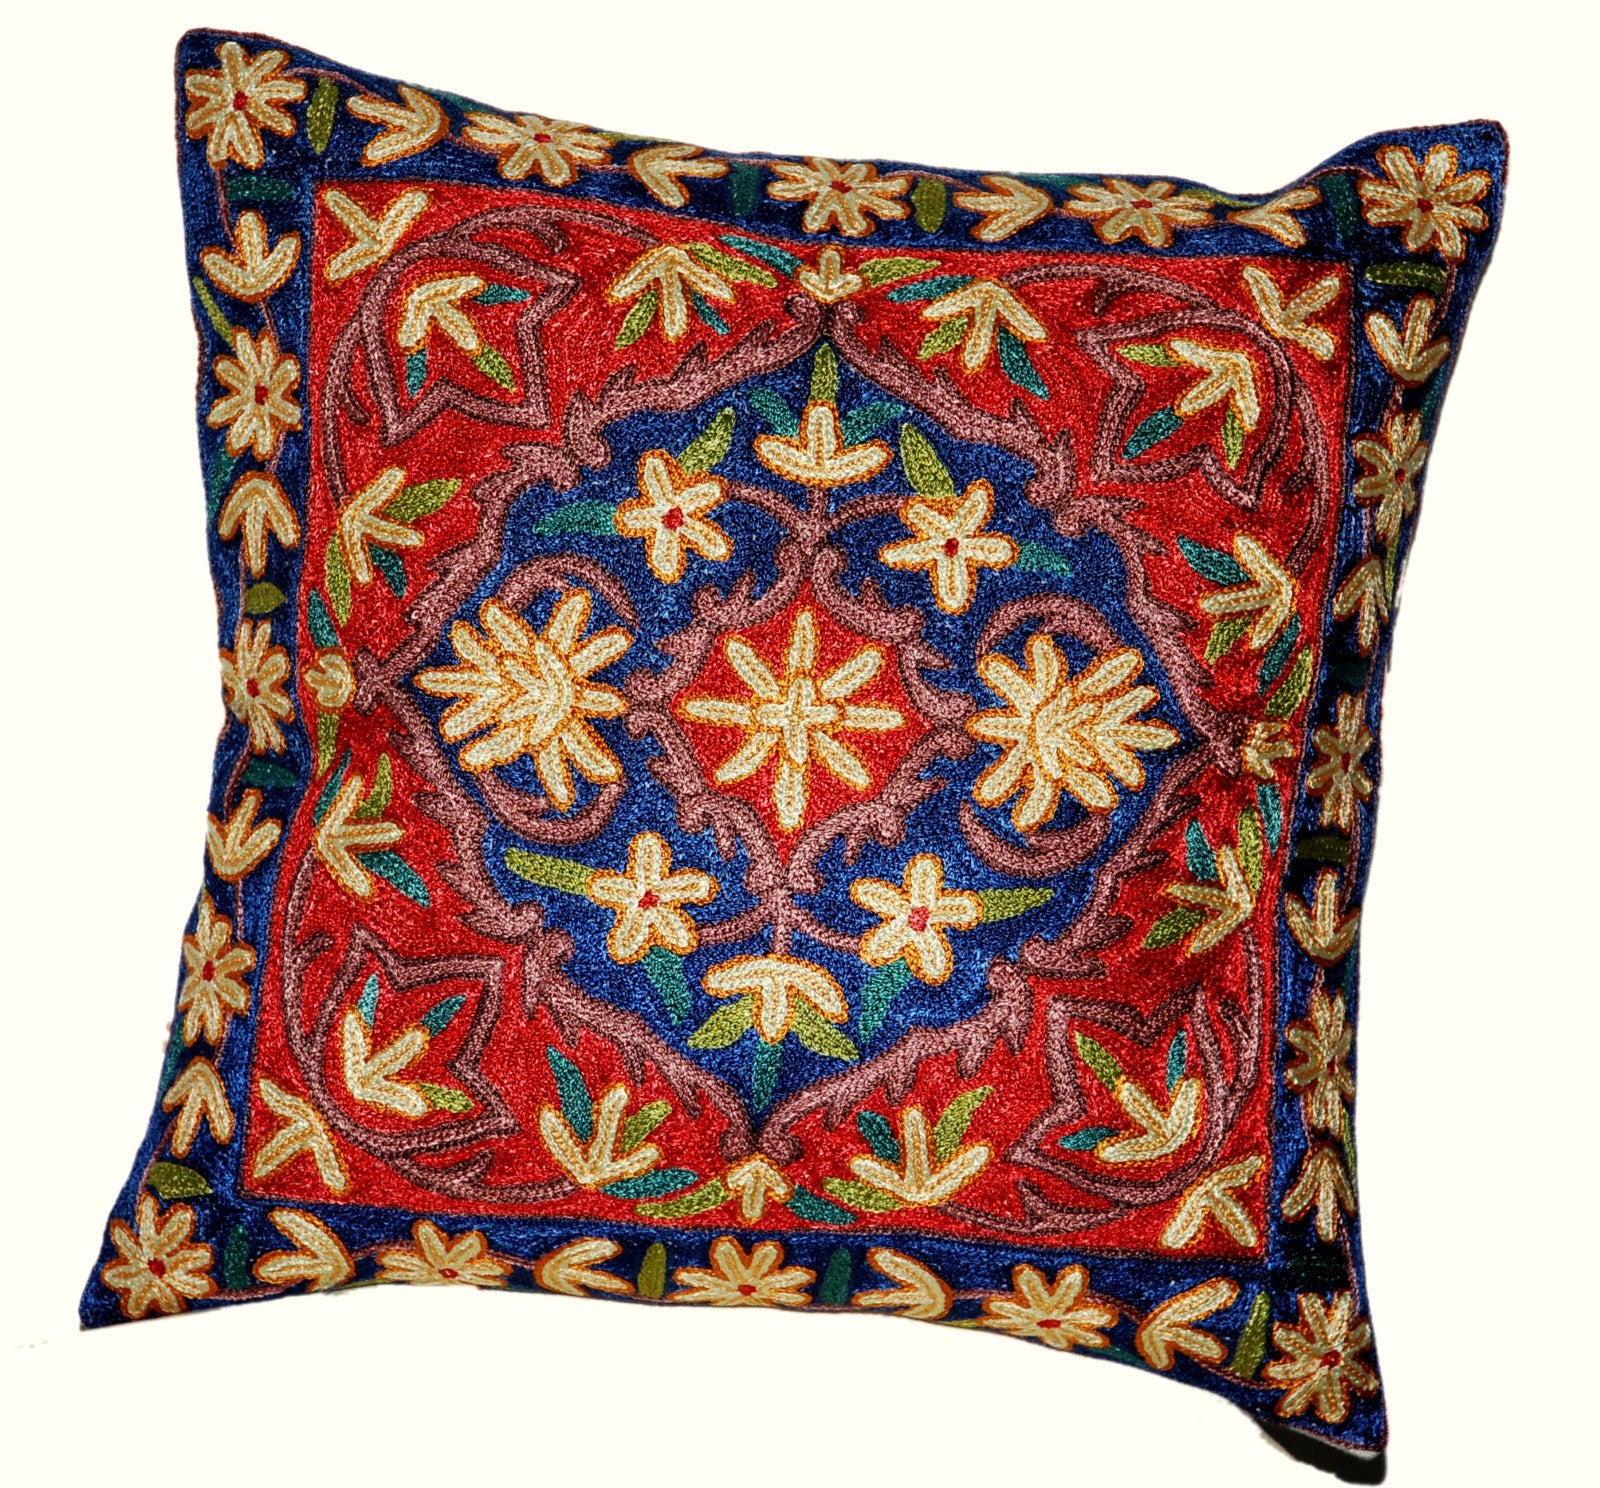 Crewel Silk Embroidered Cushion Throw Pillow Cover, Multicolor #CW2009